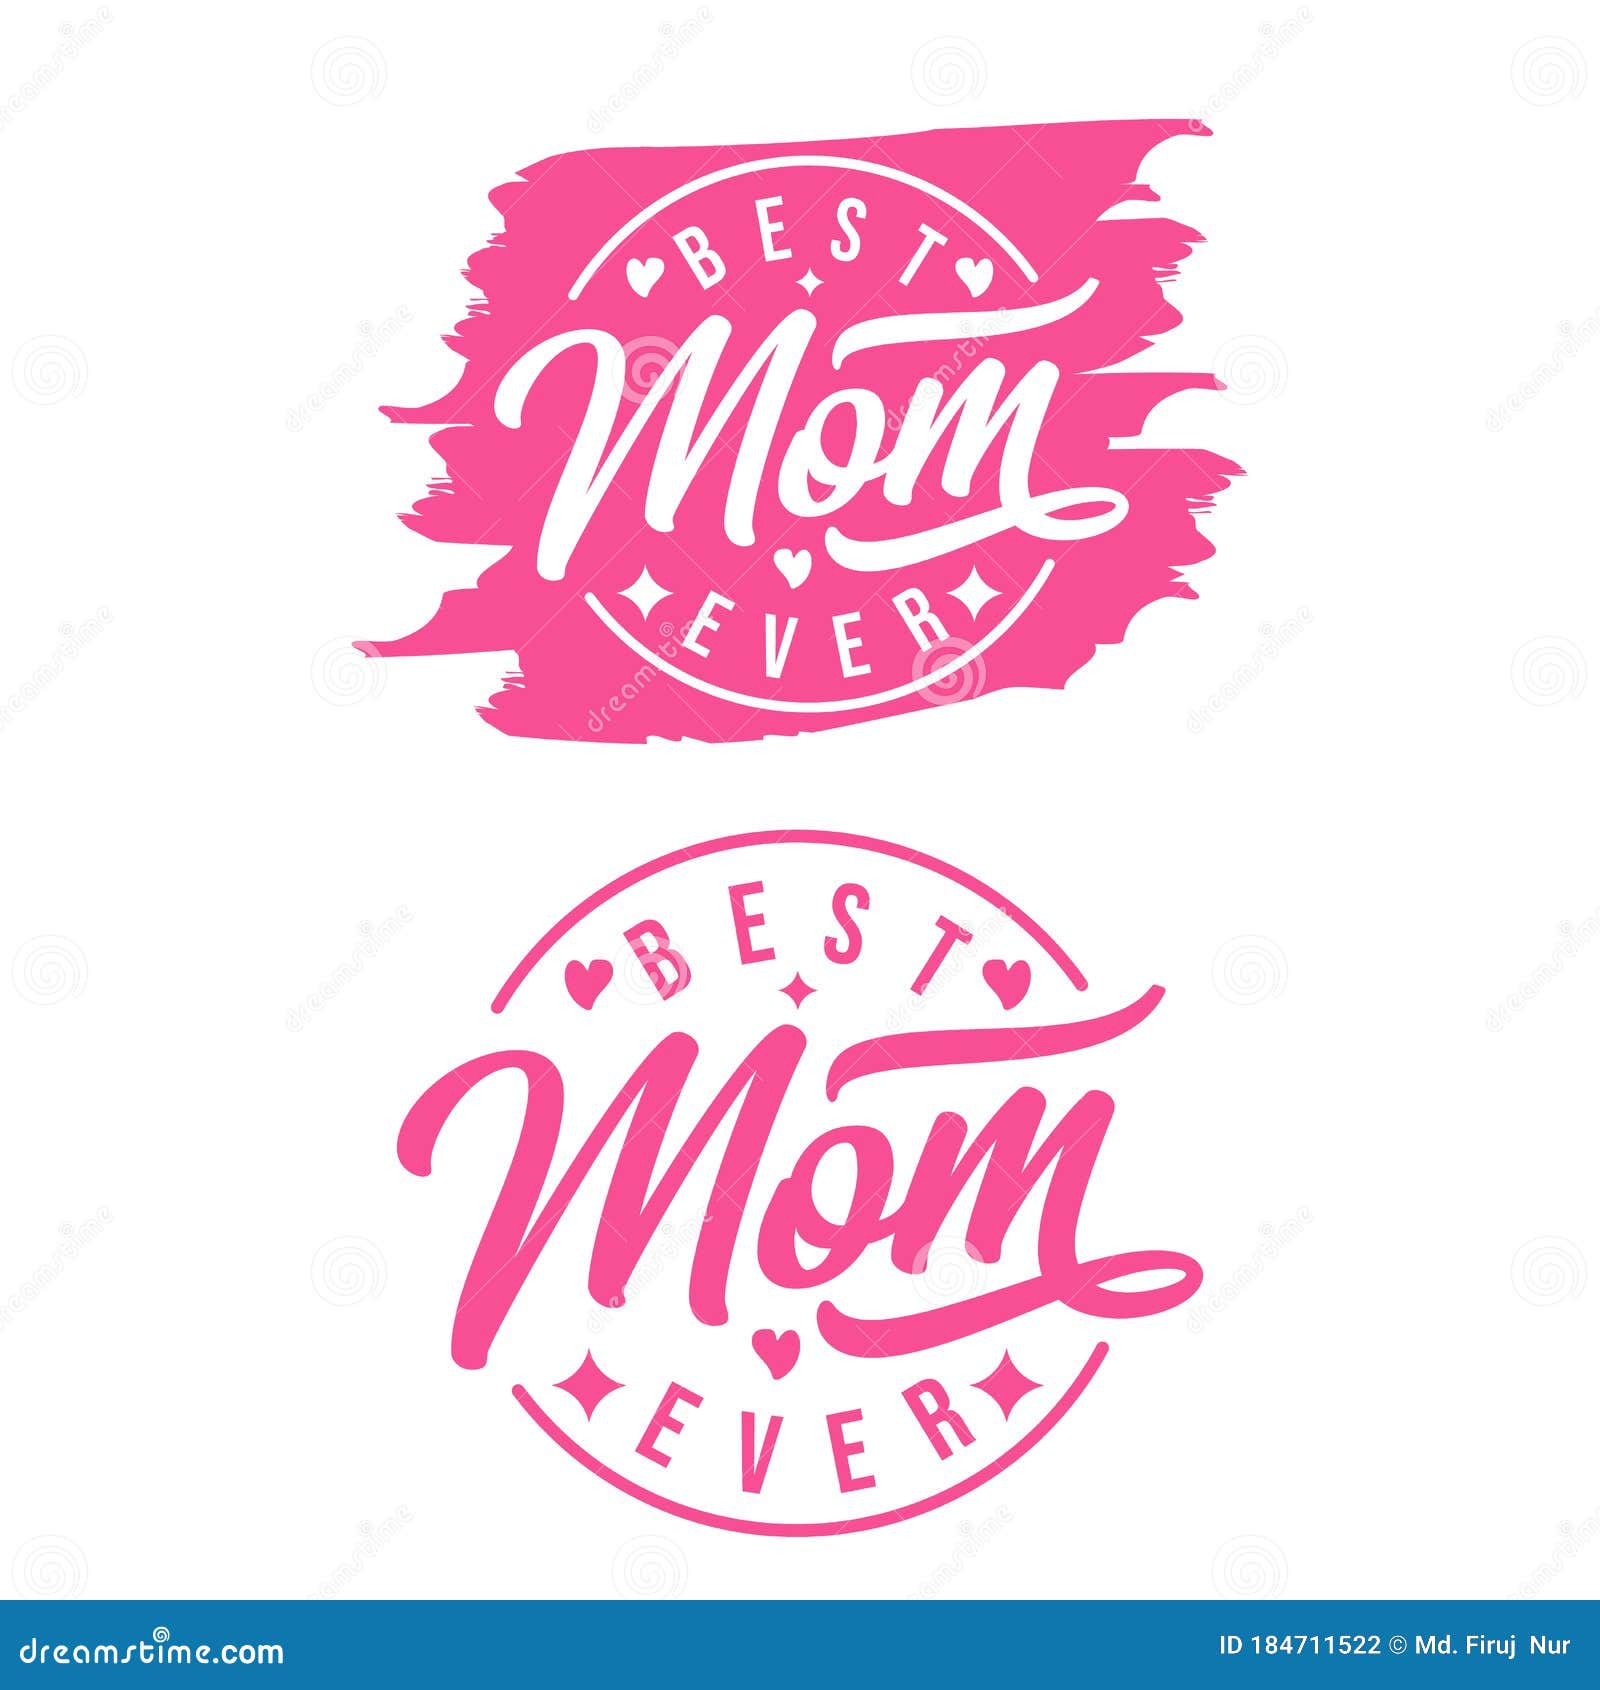 https://thumbs.dreamstime.com/z/best-mom-ever-excellent-holiday-design-mother-s-day-modern-hand-lettering-calligraphy-greeting-card-t-shirt-sticker-184711522.jpg